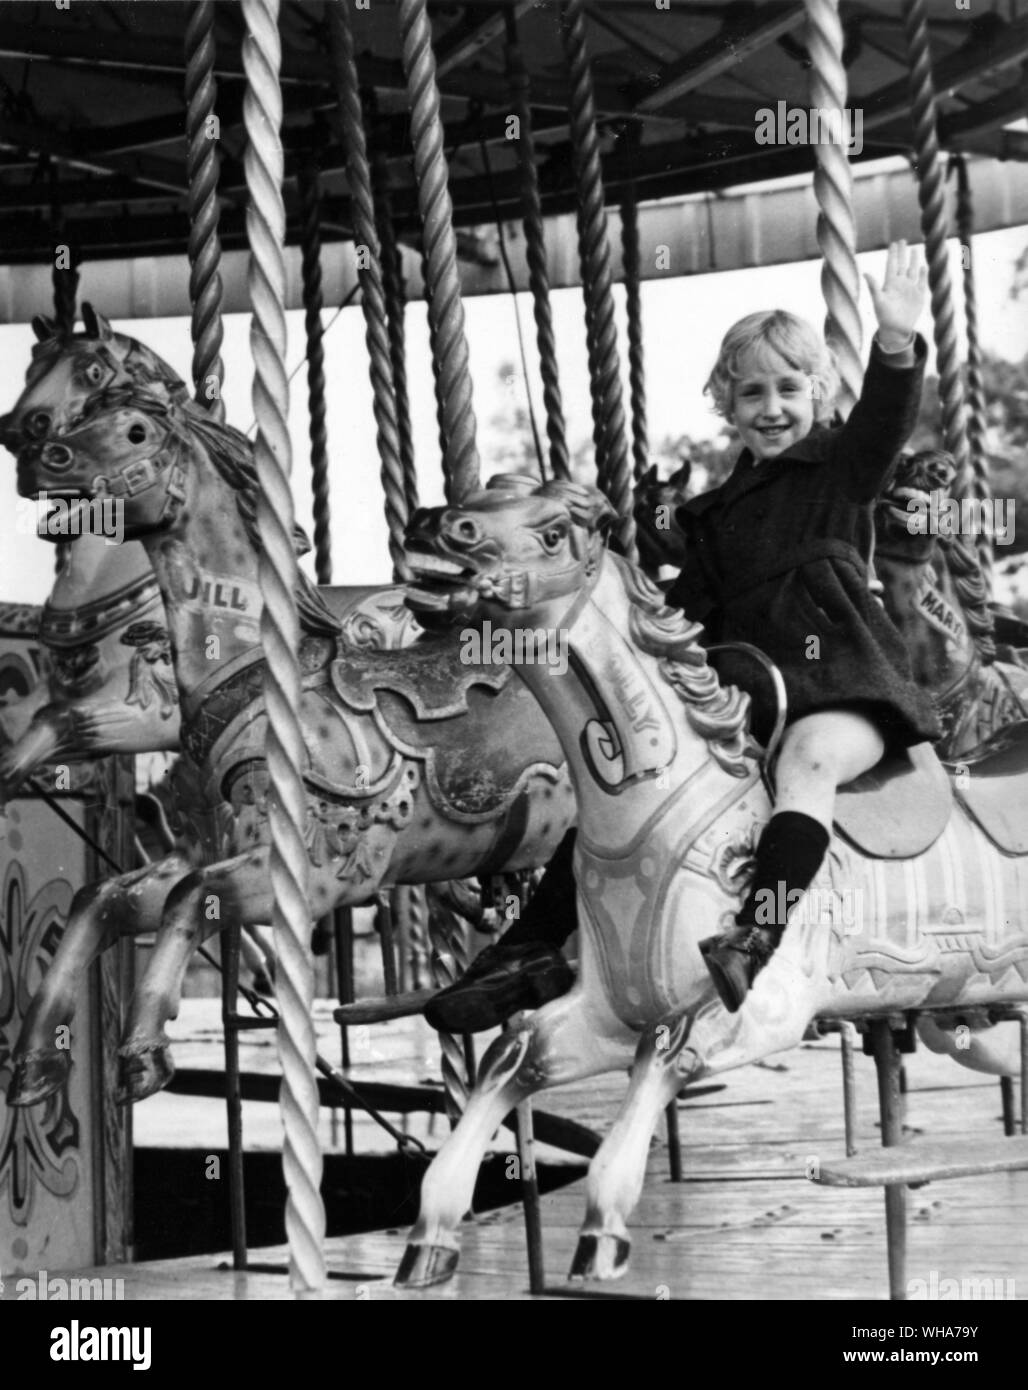 A happy girl on a merry go round at a fairground Stock Photo